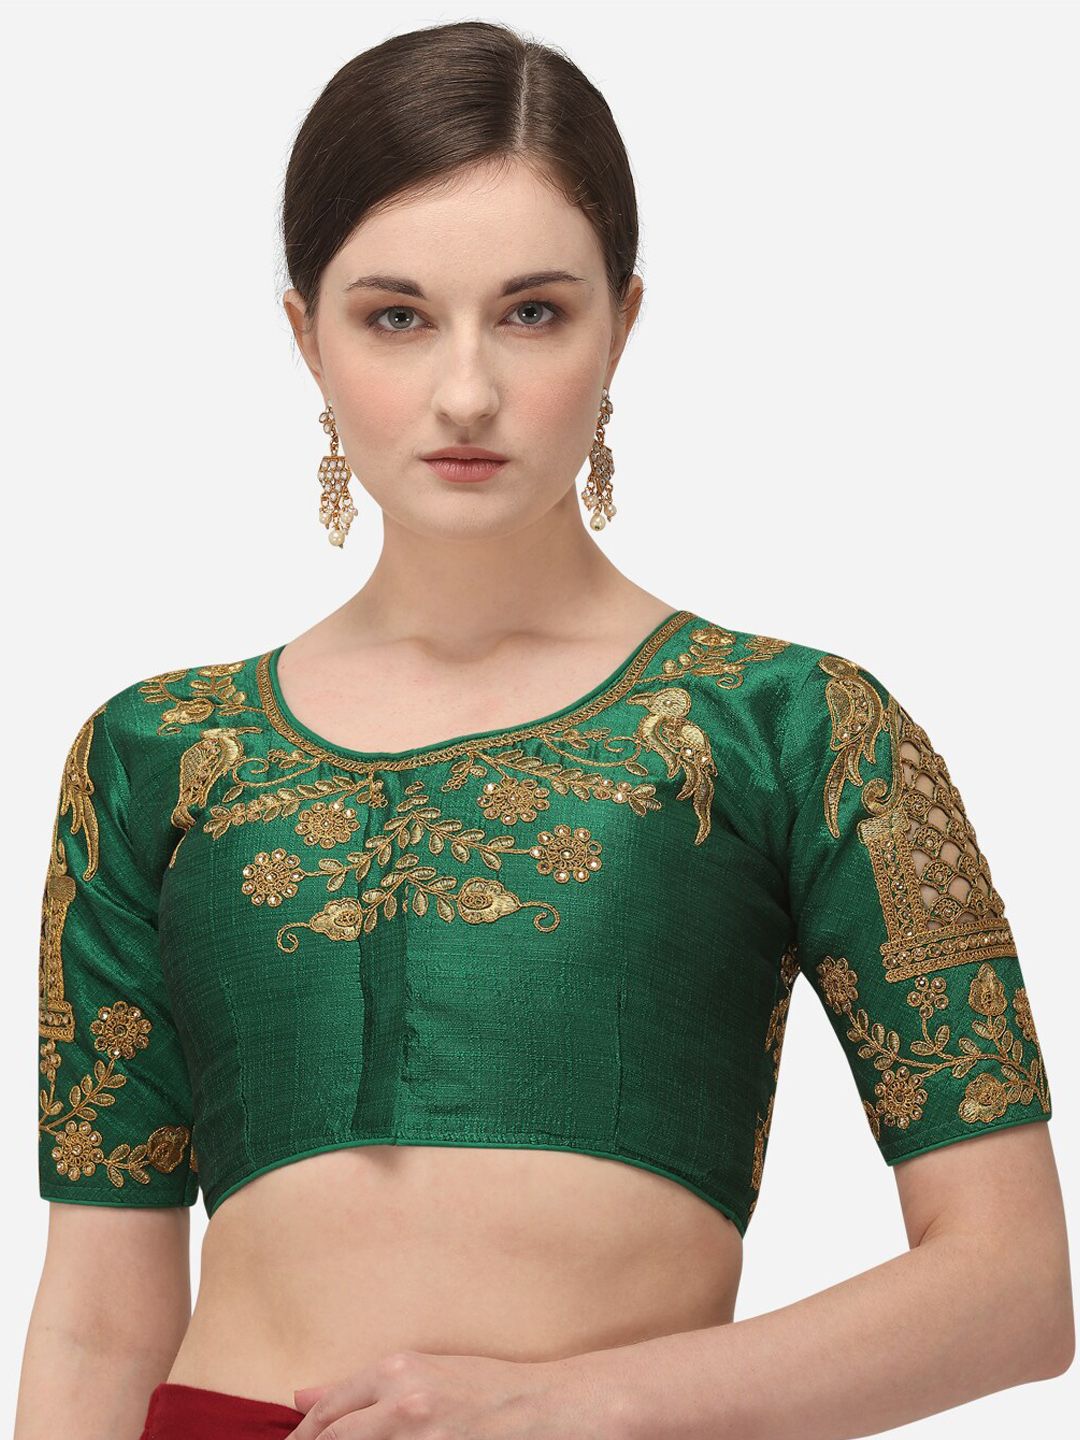 Amrutam Fab Women Green & Gold-Coloured Embroidered Raw Silk Saree Blouse Price in India